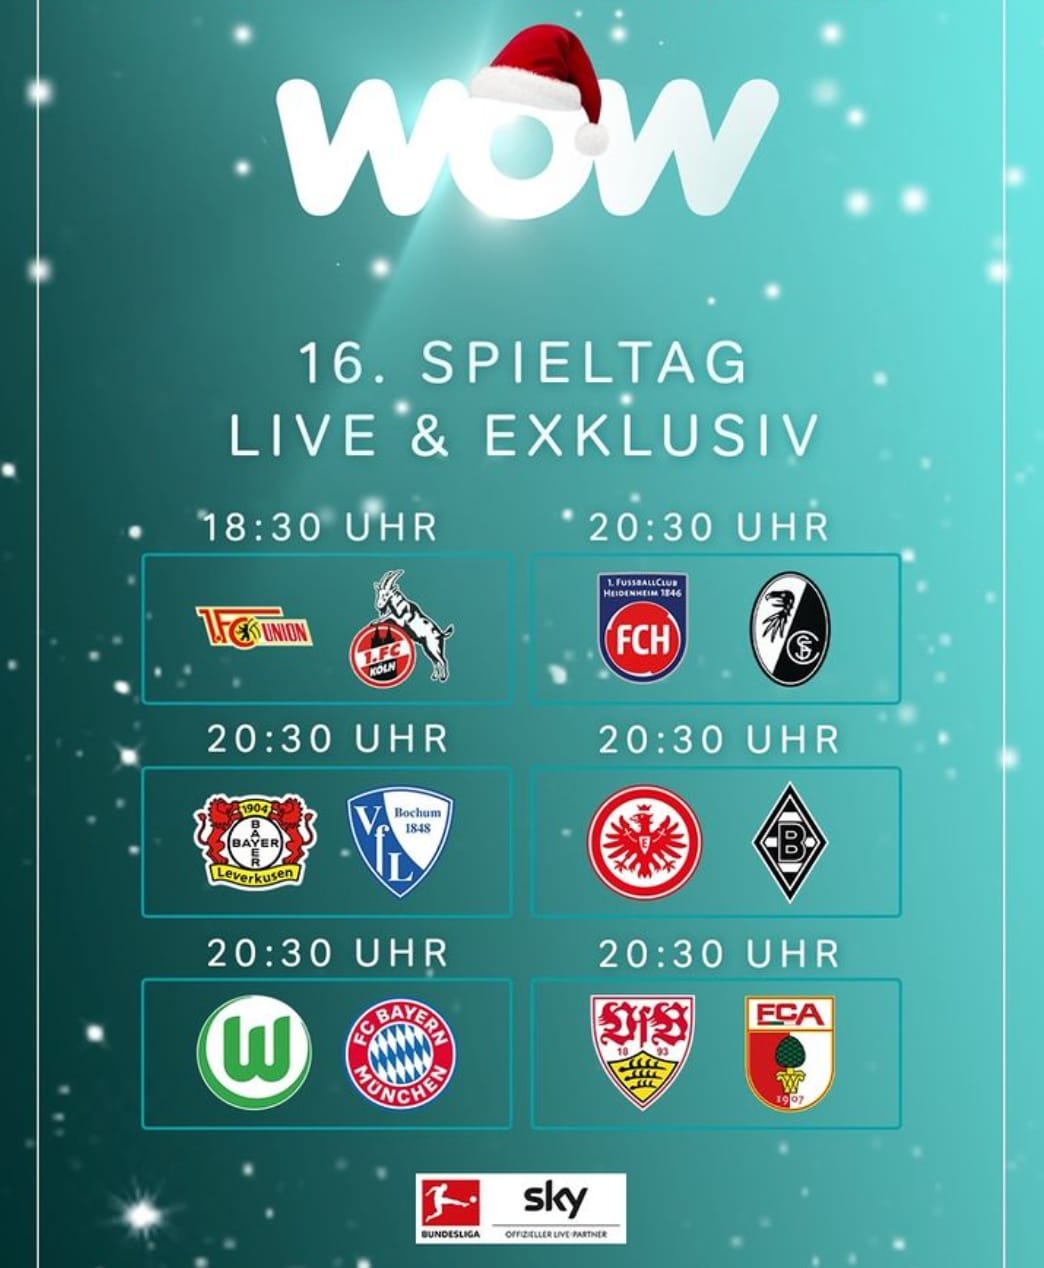 wow-sport-angebote